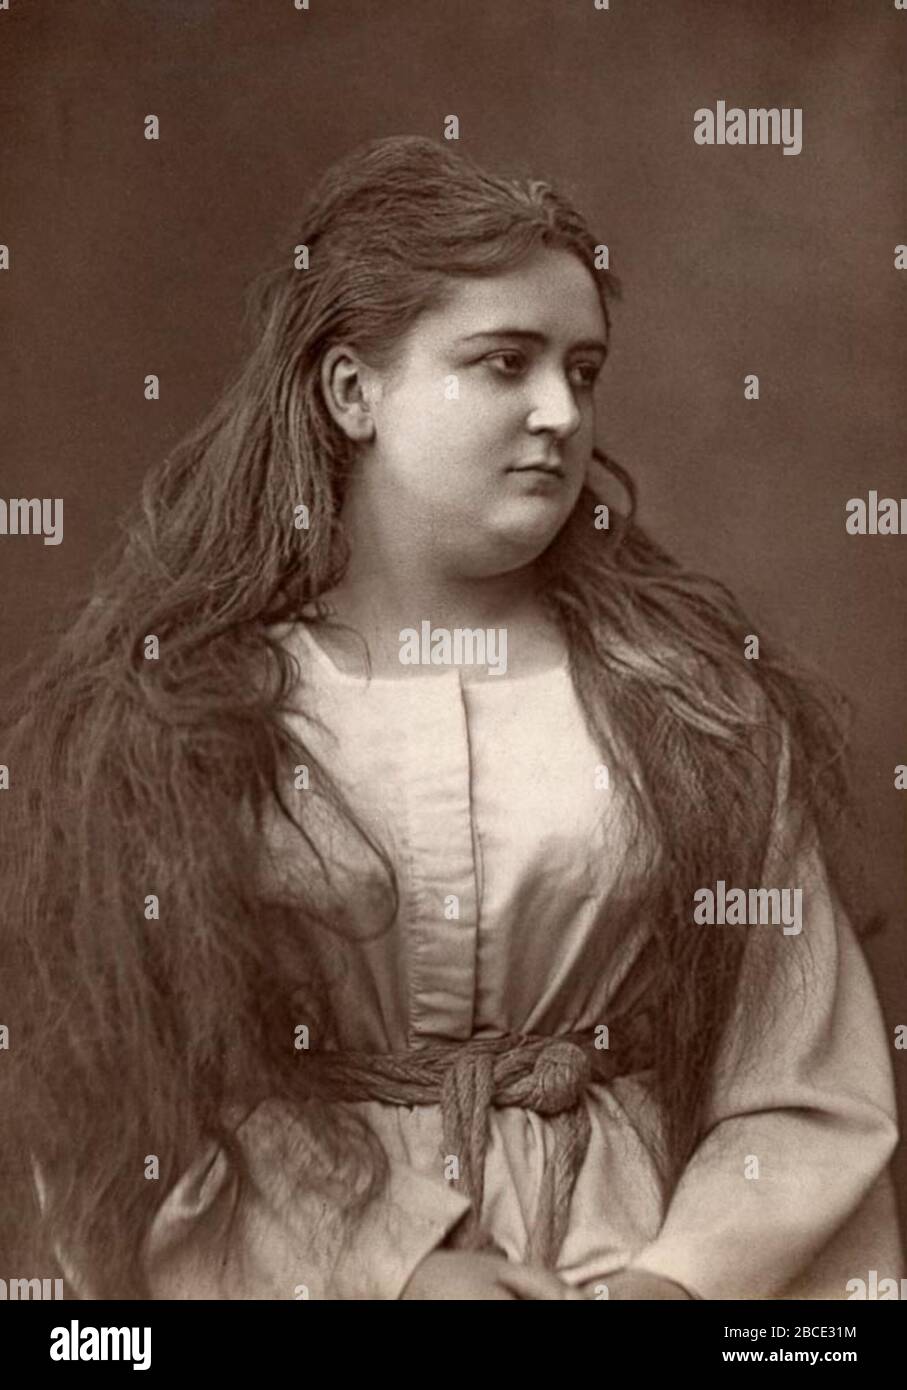 'English: Photograph of the French operatic soprano Marguerite Baux as Marguerite in Faust at the Paris opera in 1877; 1877; https://www.artlyriquefr.fr/personnages/Baux%20Marguerite.html; Unknown author; ' Stock Photo